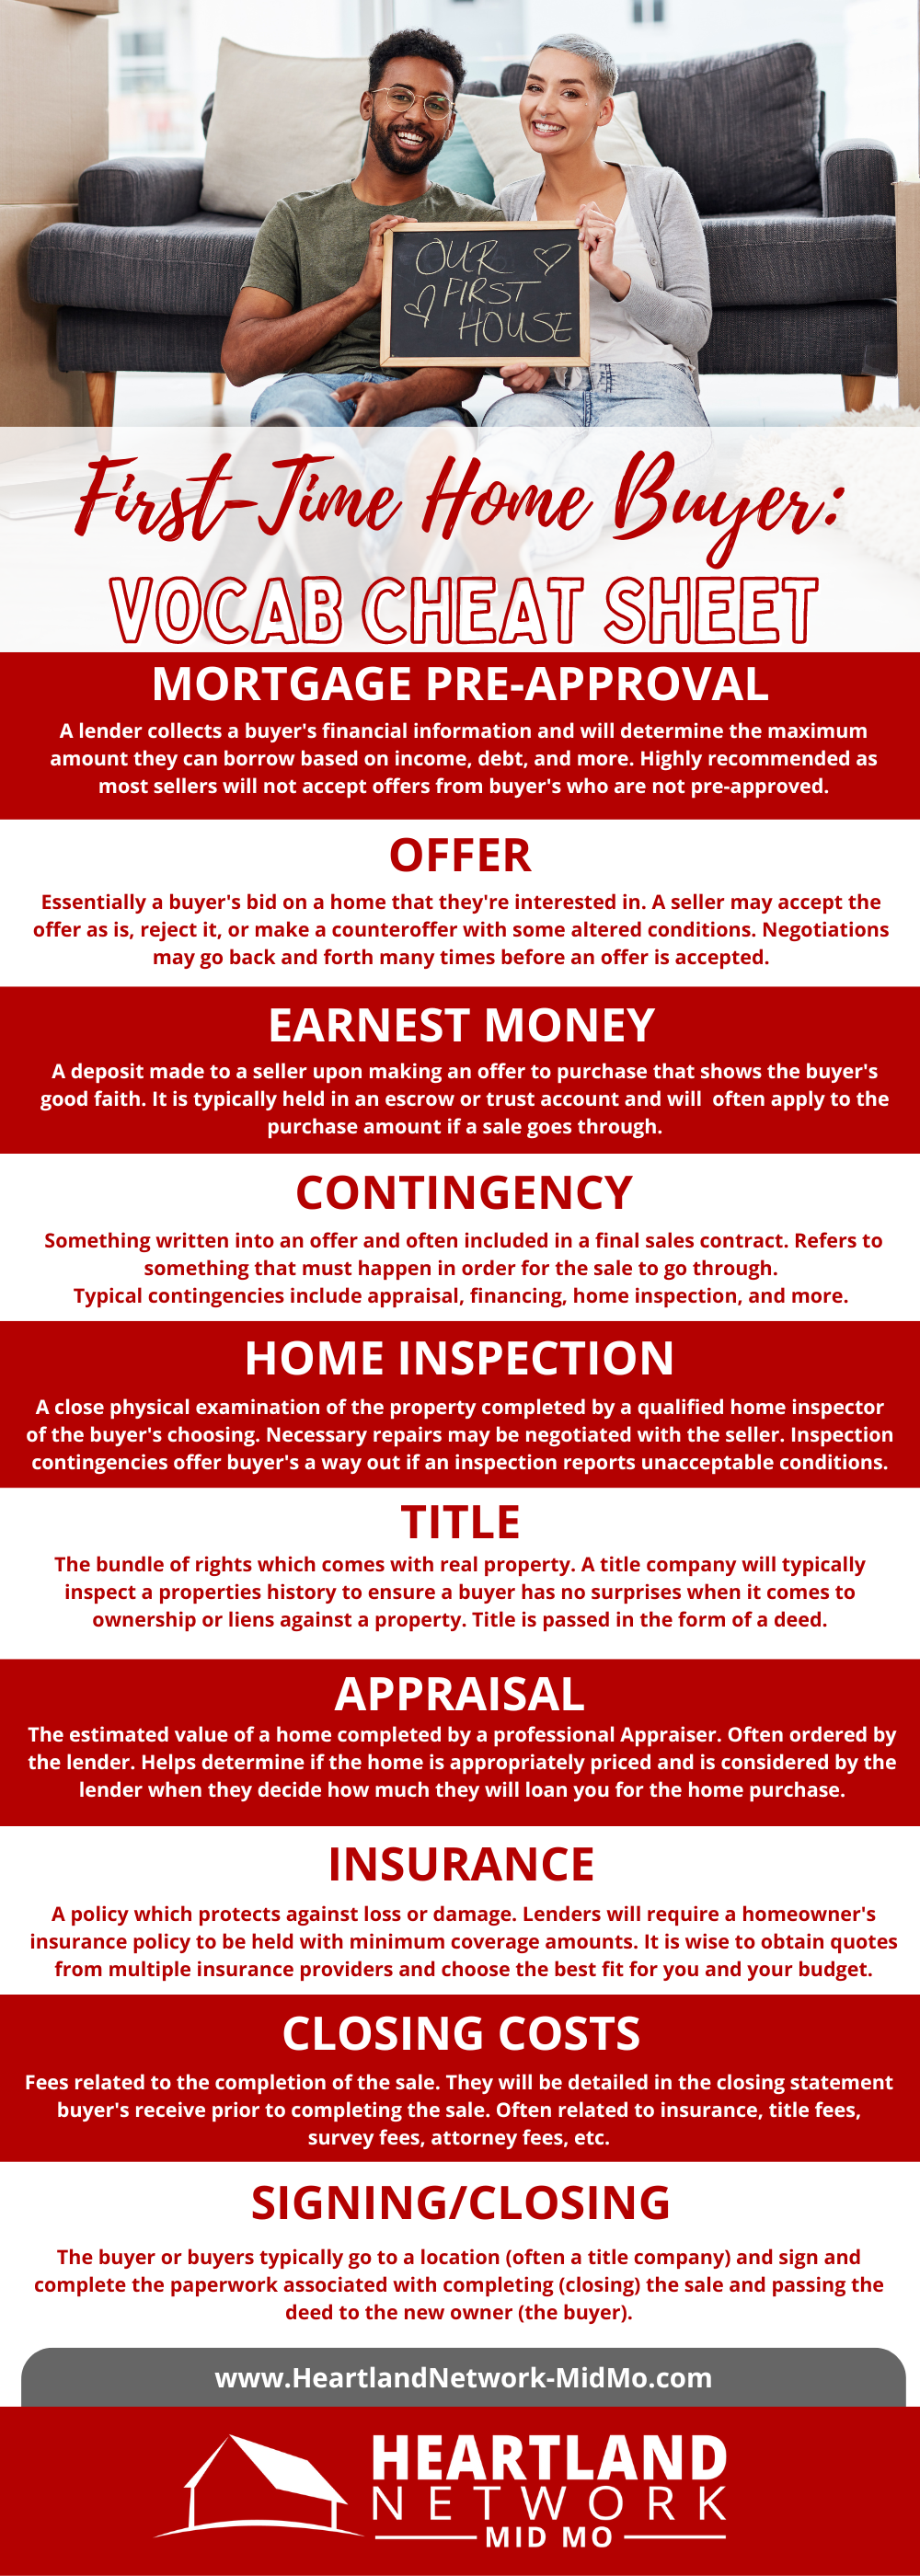 First Time Home Buyer: Vocab Cheat Sheet